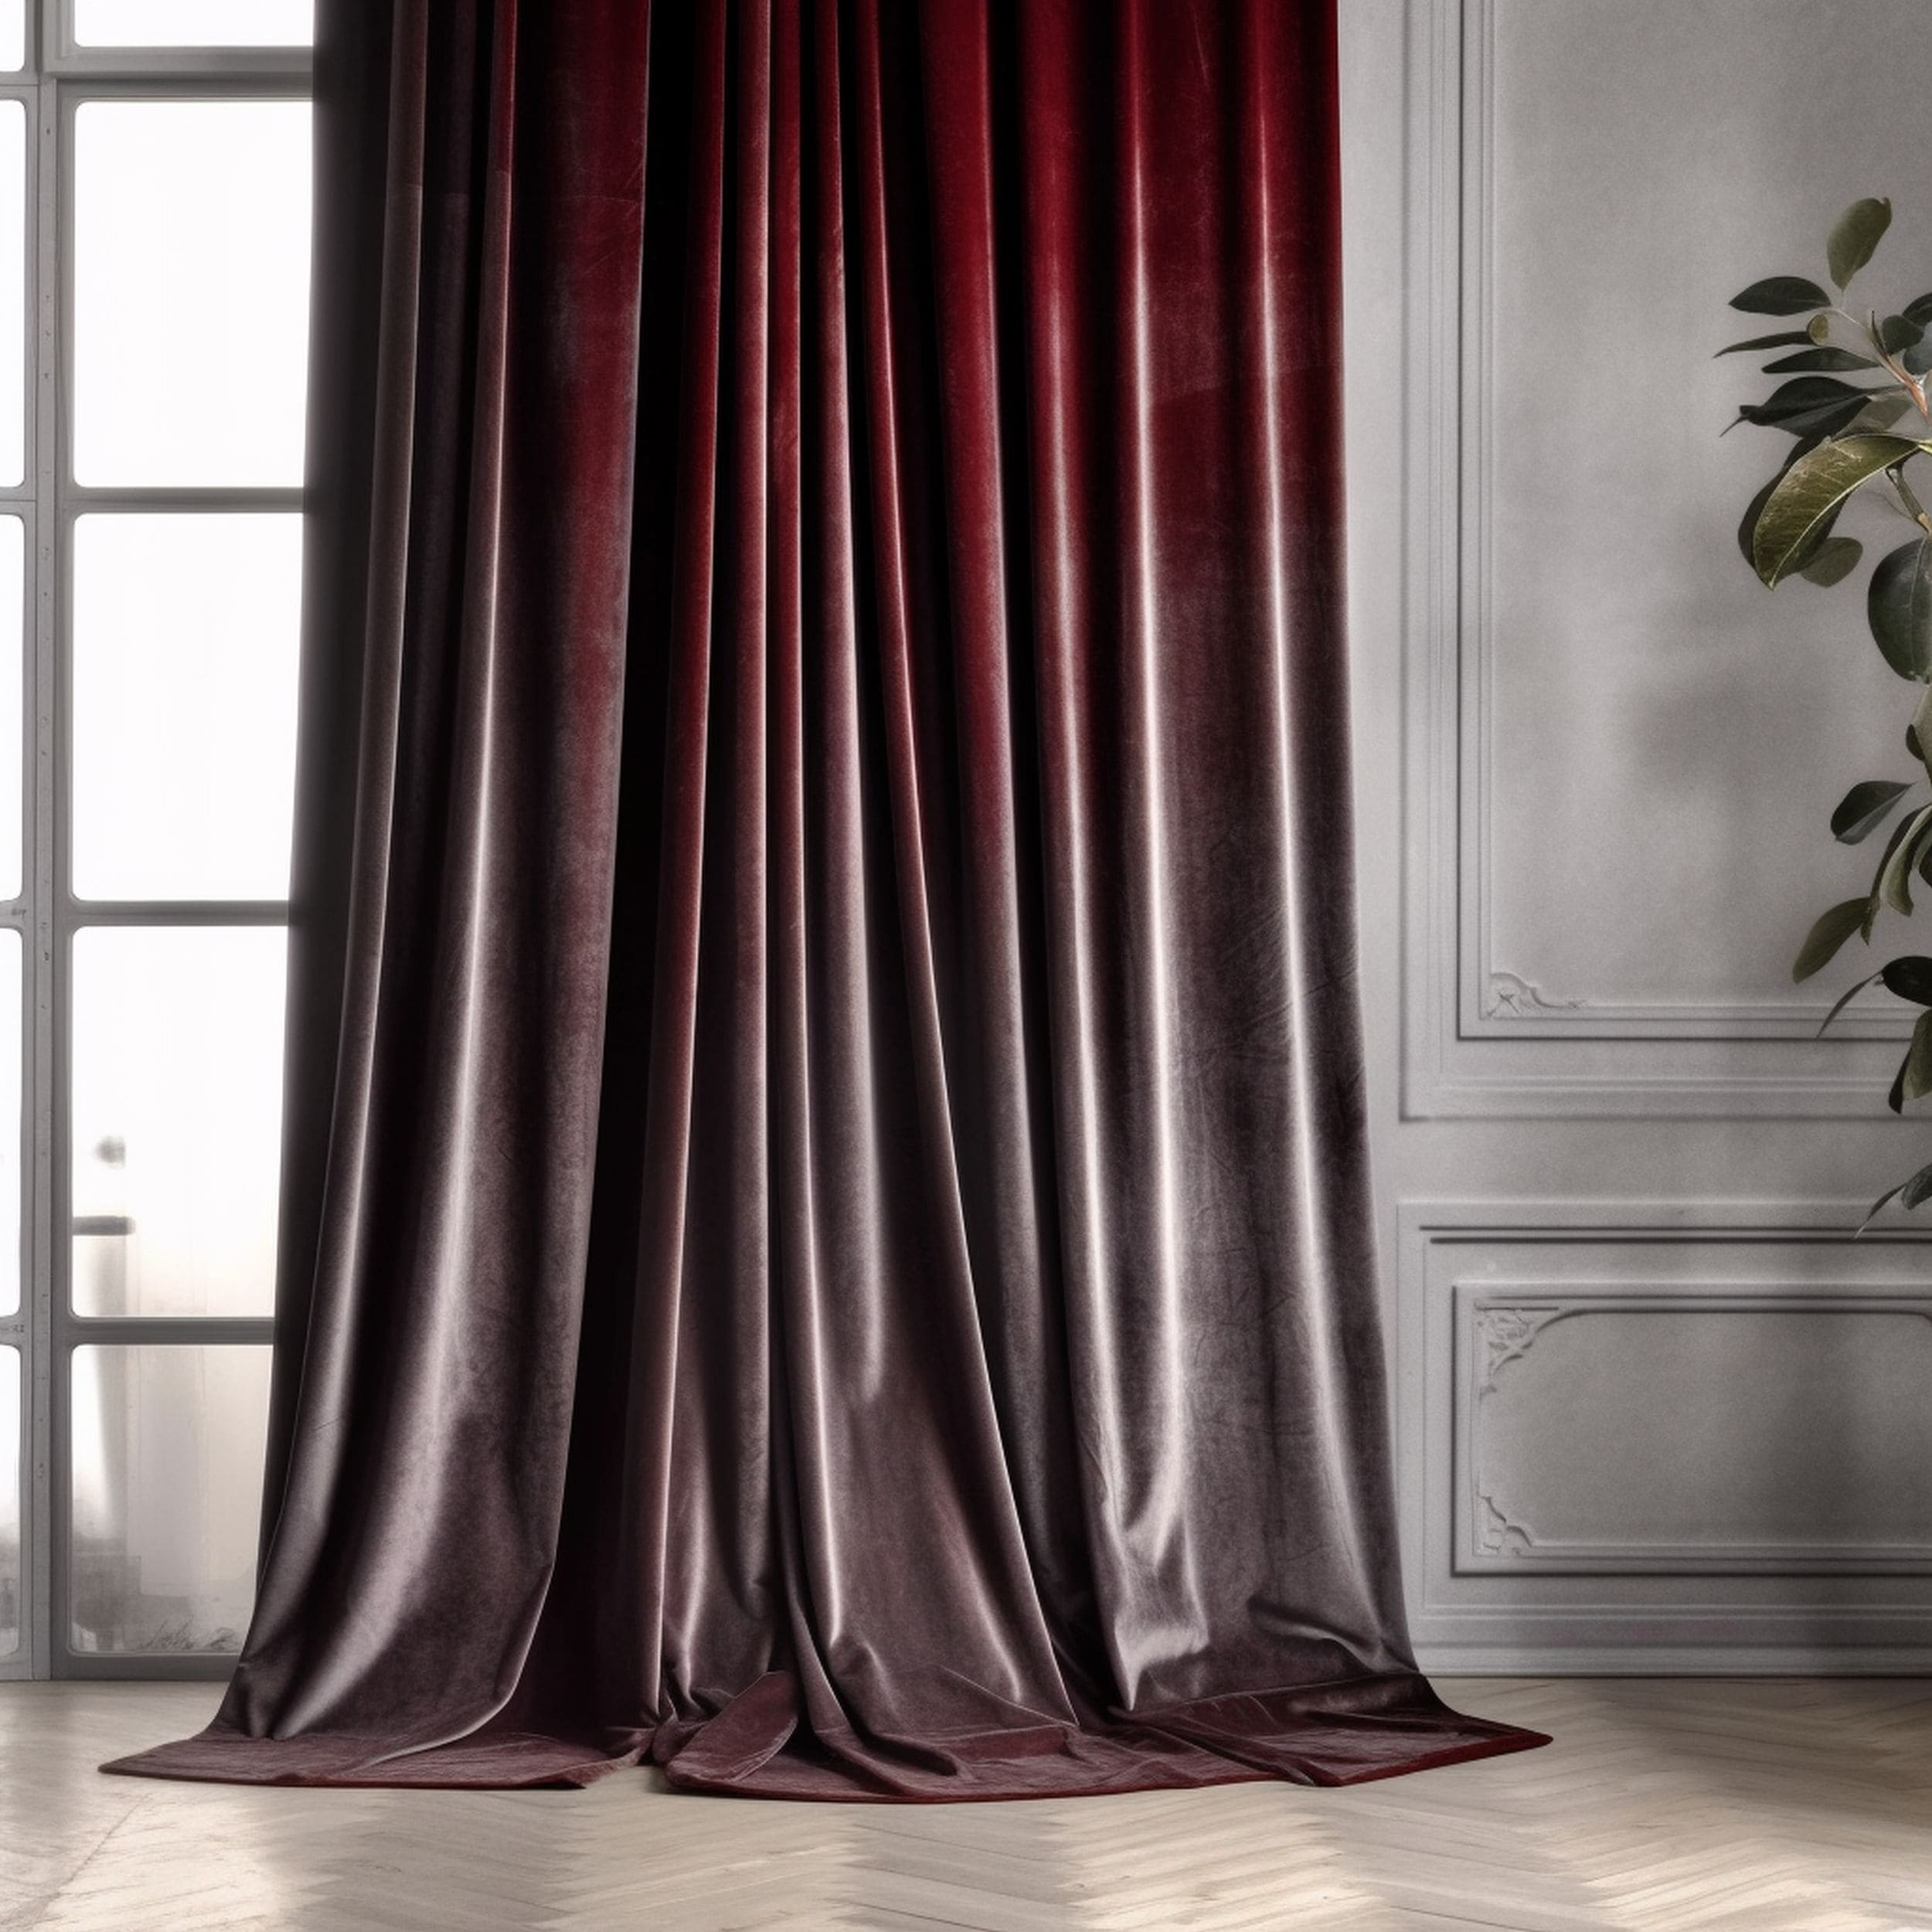 The 7 Best Materials/Fabrics for Drapes and Curtains - Rhythm of the Home